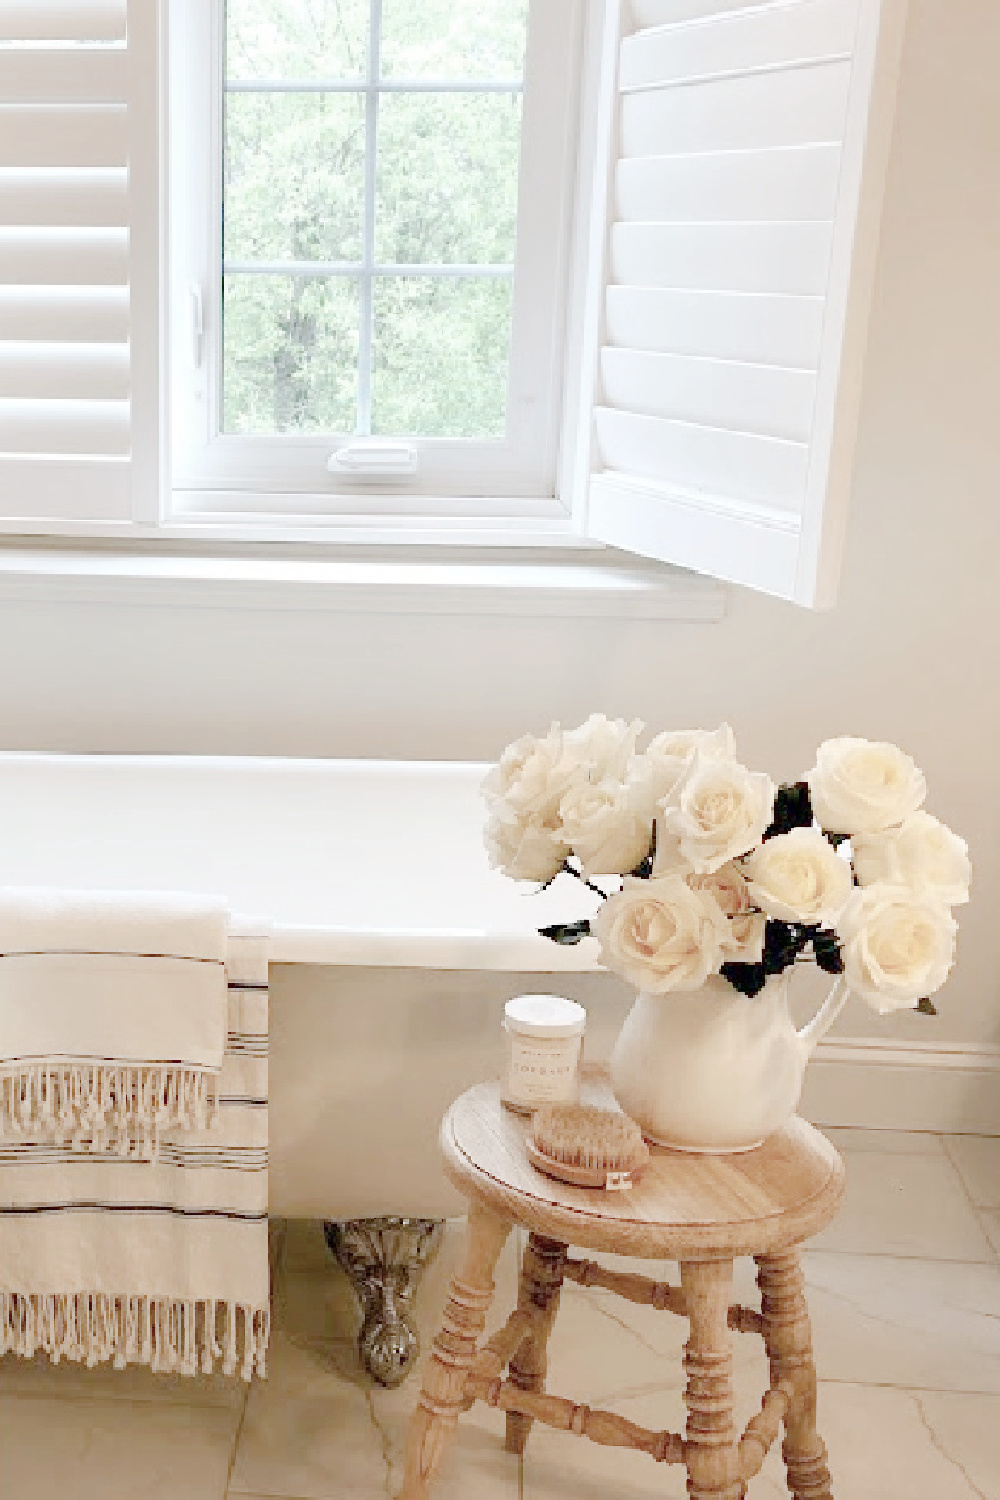 Modern French white bathroom with clawfoot tub, white roses, Turkish towels, and rustic wood stool - Hello Lovely Studio.